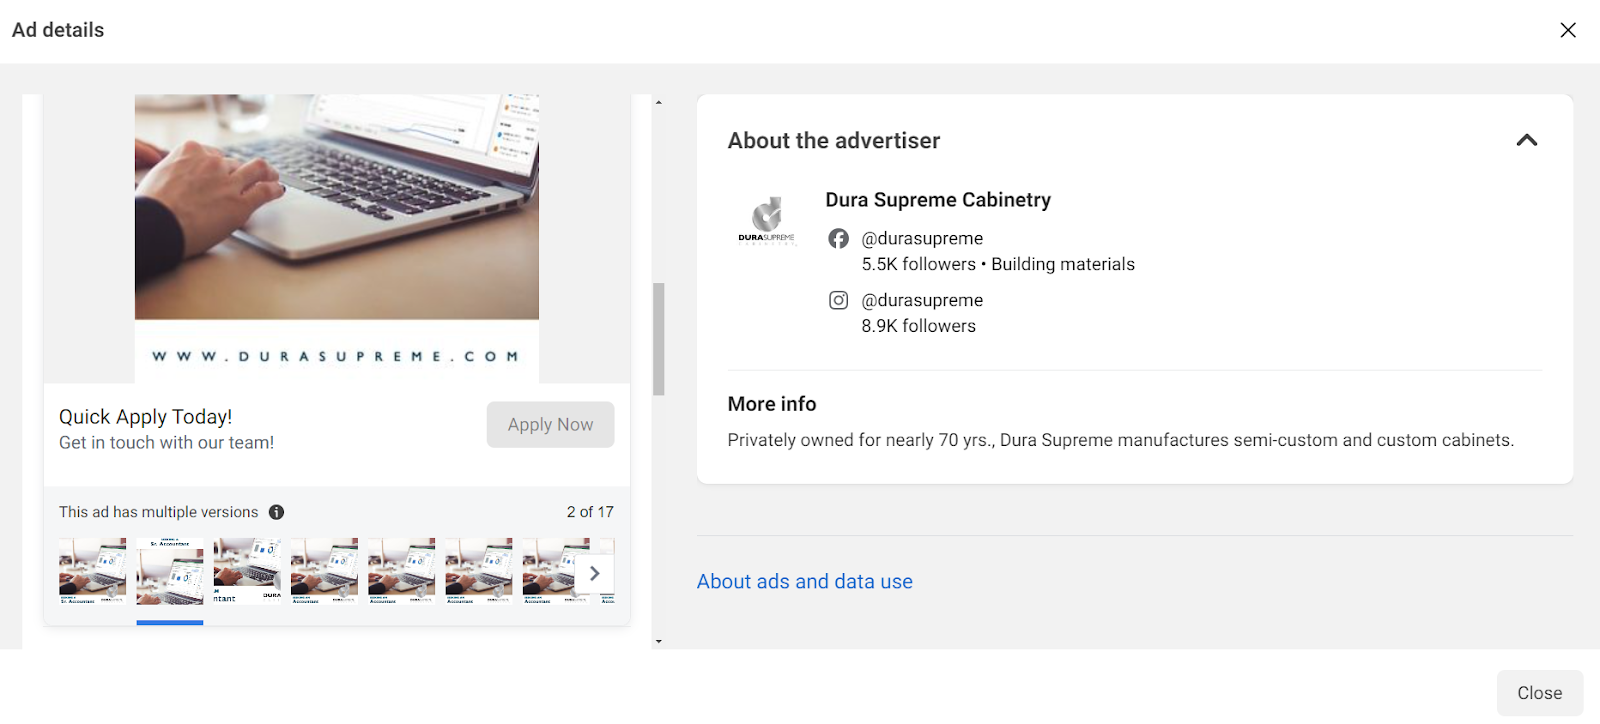 Facebook Ads Library: Dura Supreme Cabinetry Ads Example